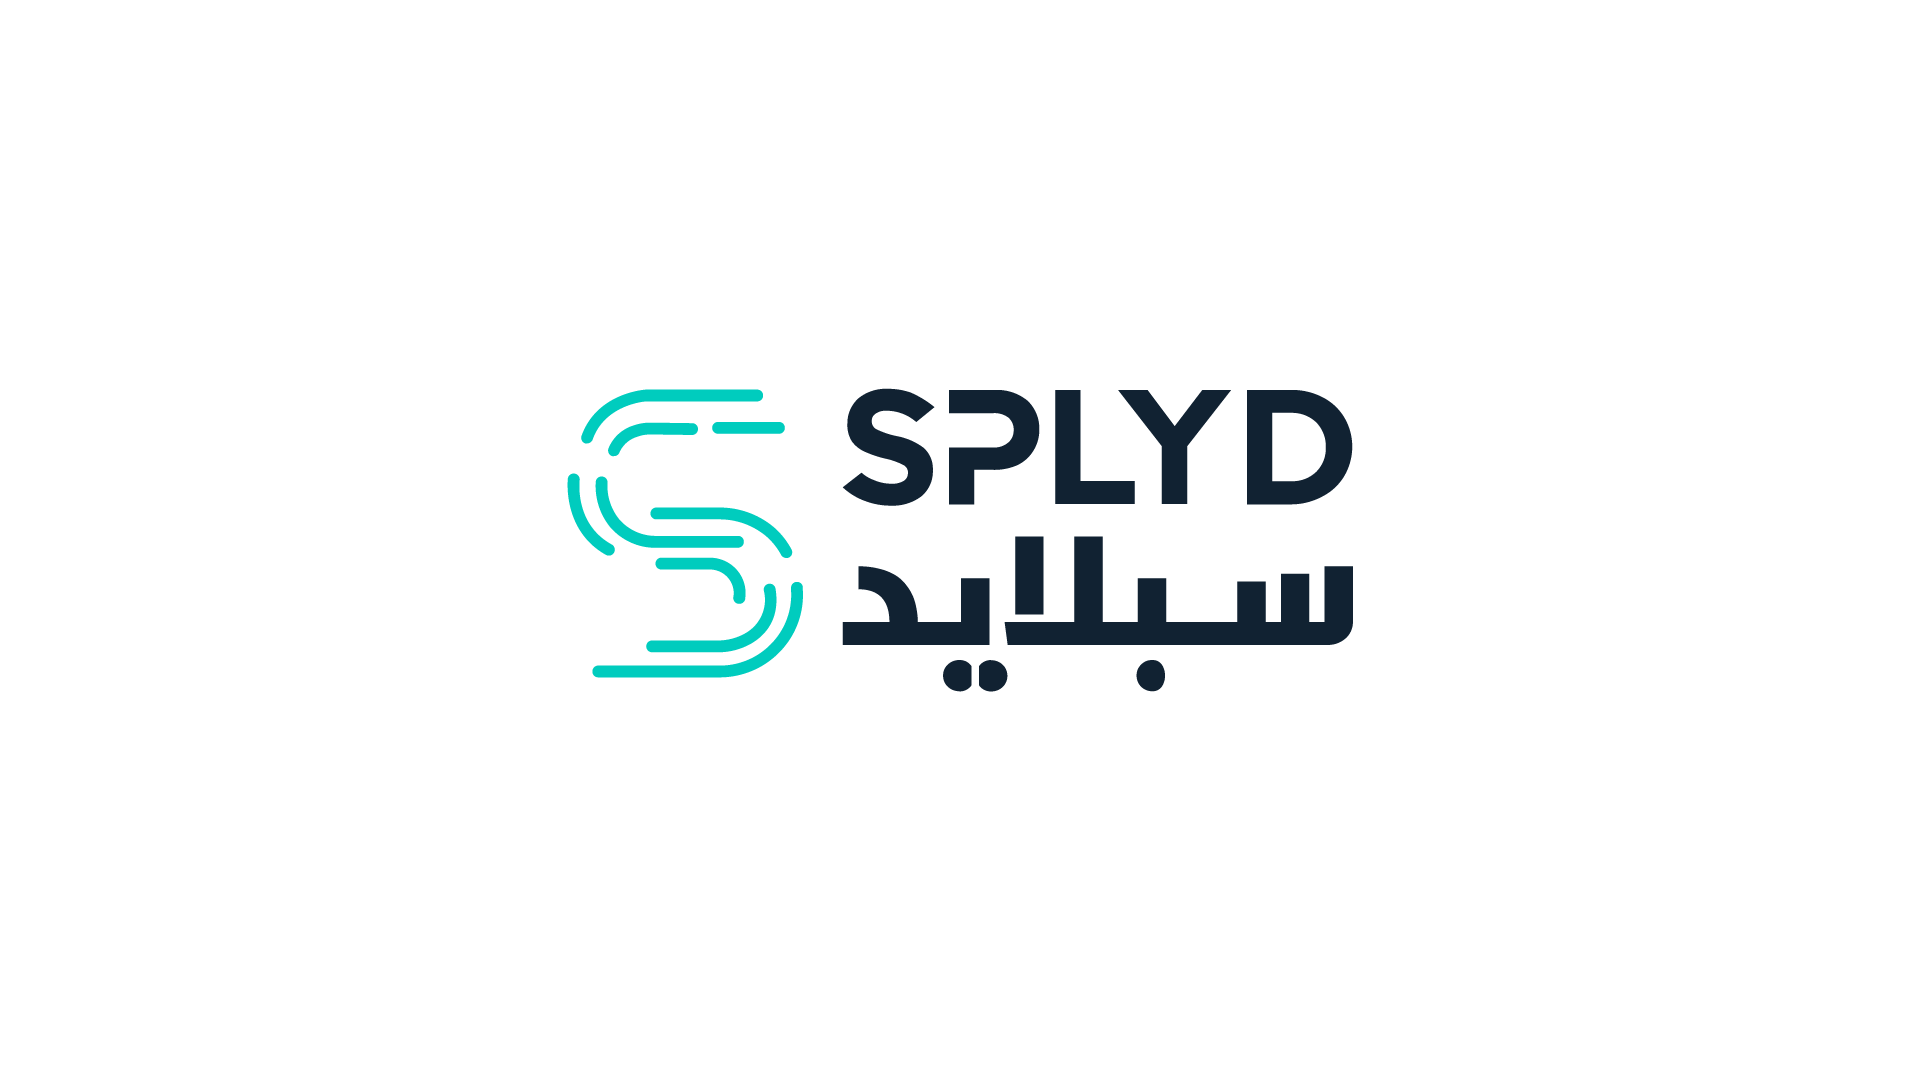 Splyd